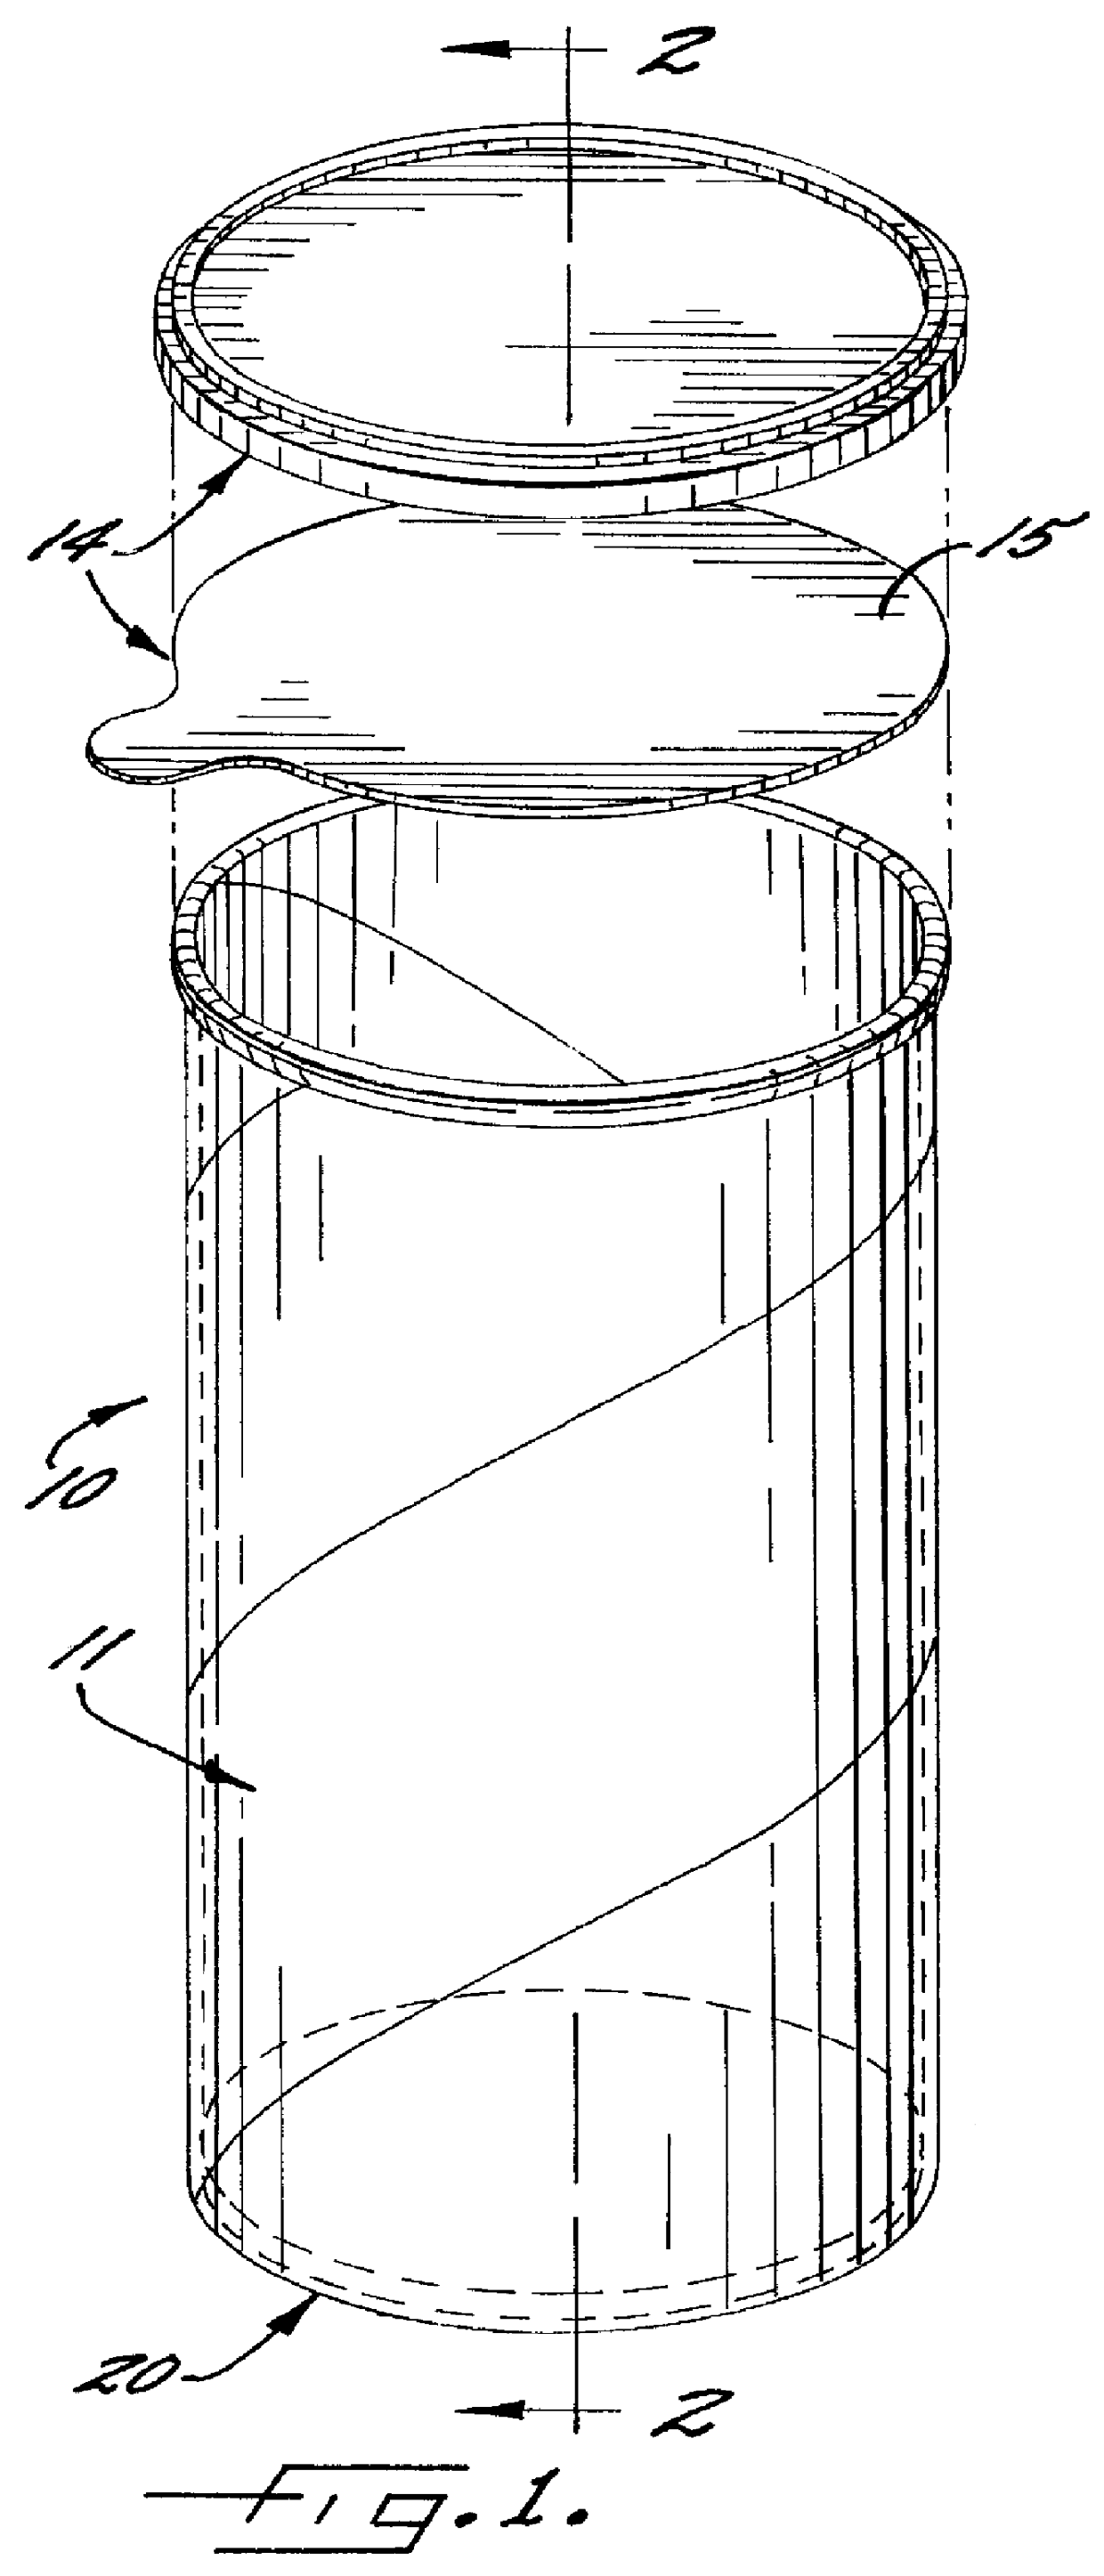 Process for closing and hermetically sealing a bottom of a container